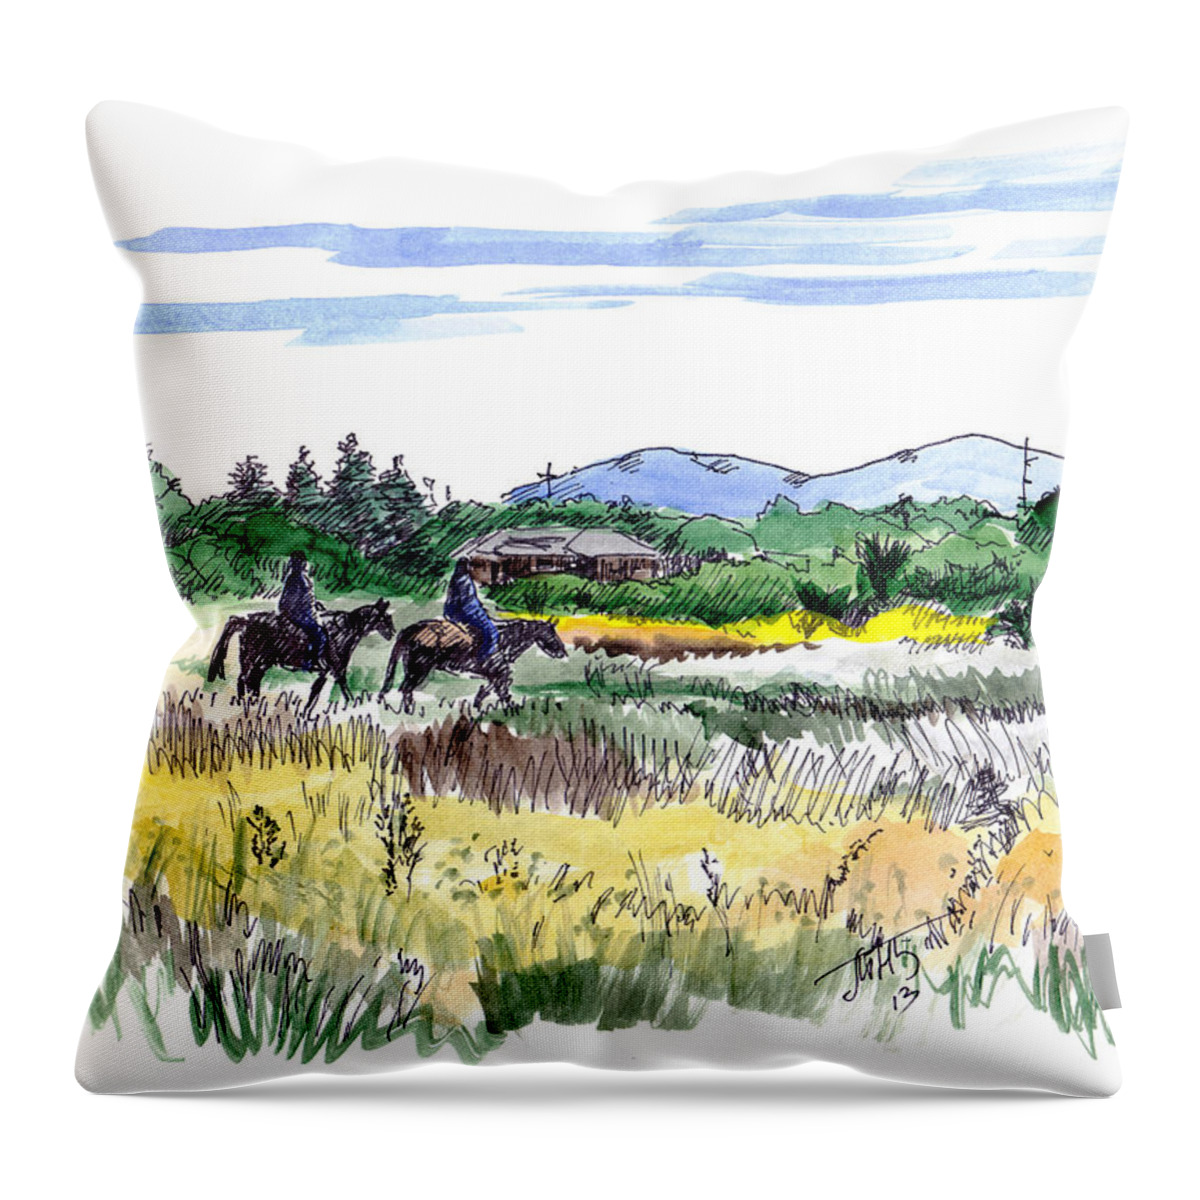 Horse Riding Throw Pillow featuring the painting Horse Riding by Masha Batkova